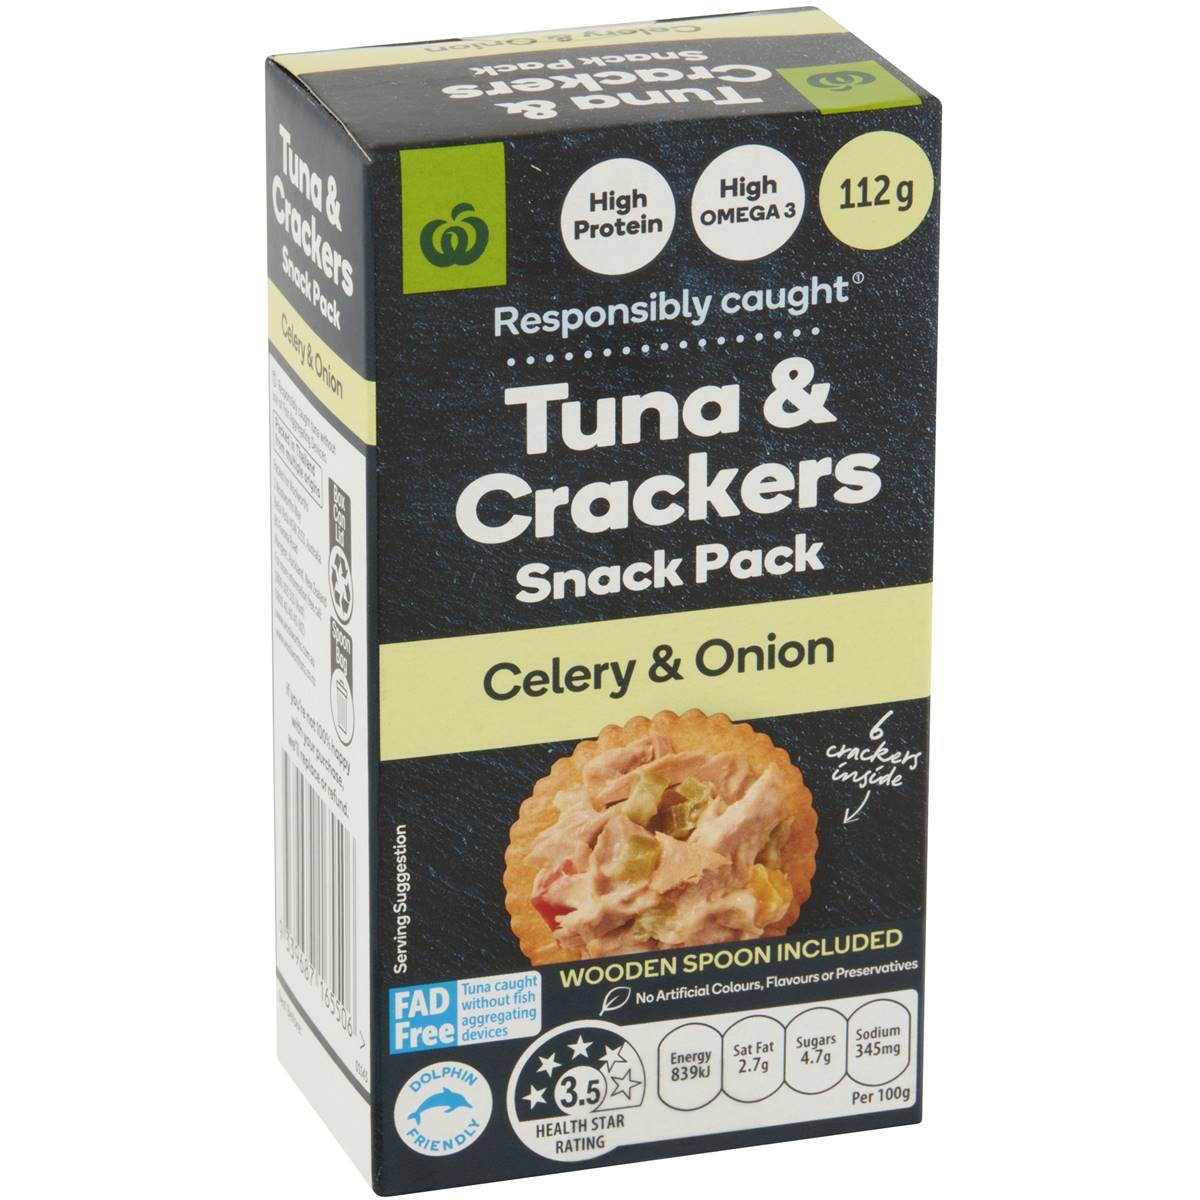 Calories in Woolworths Tuna & Crackers Snack Pack Celery & Onion